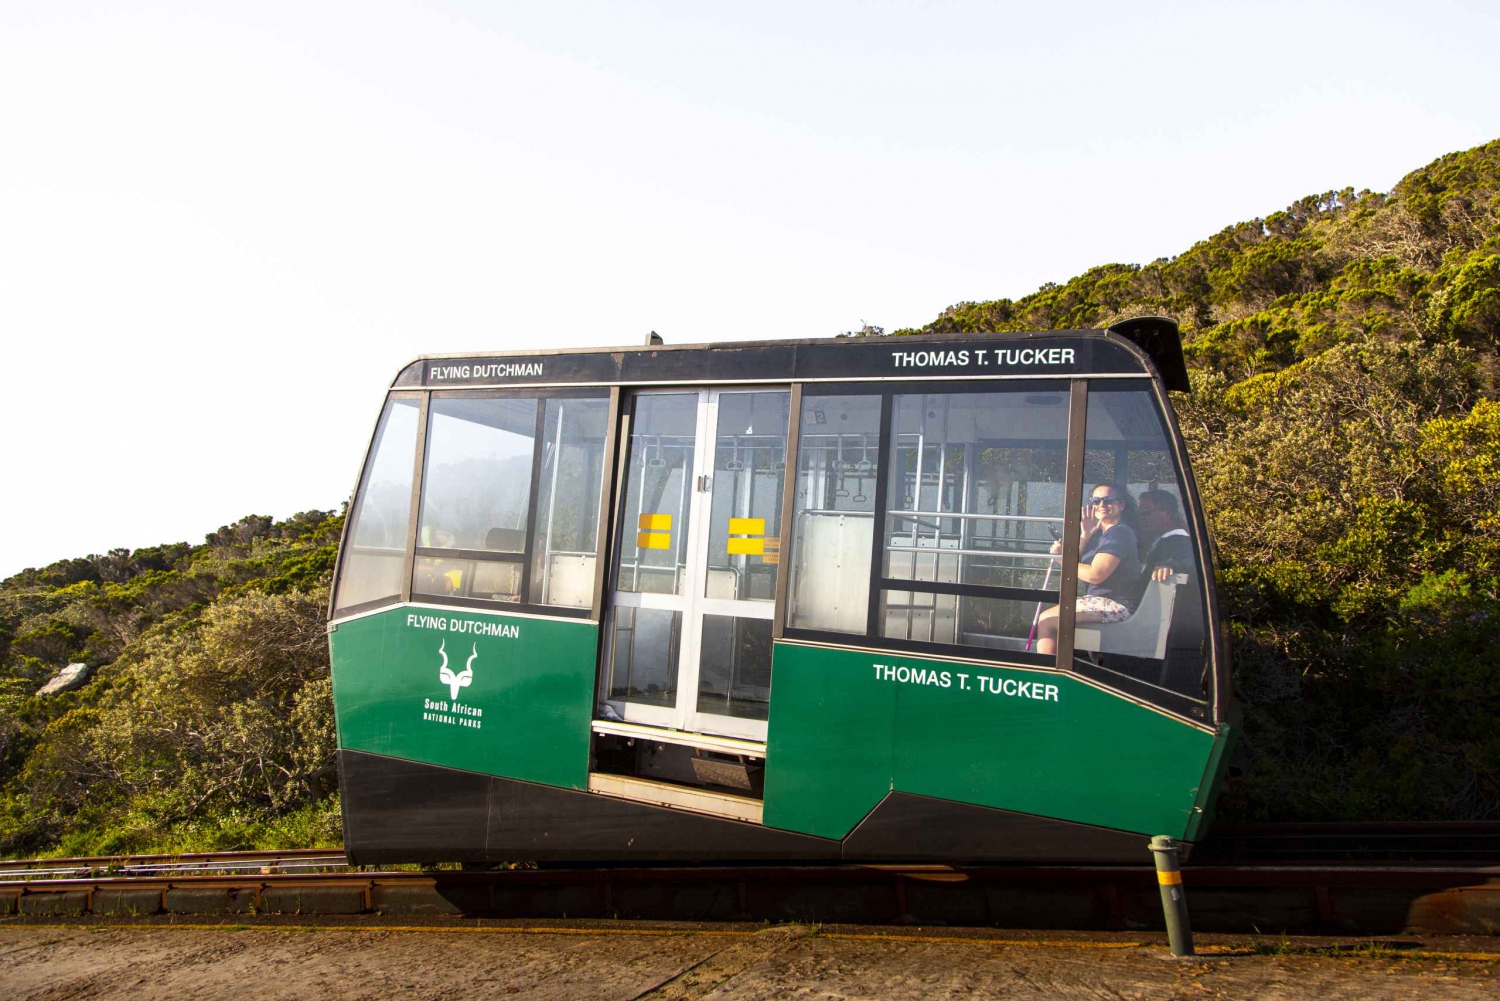 Cape Town: Cape Point Funicular Ticket